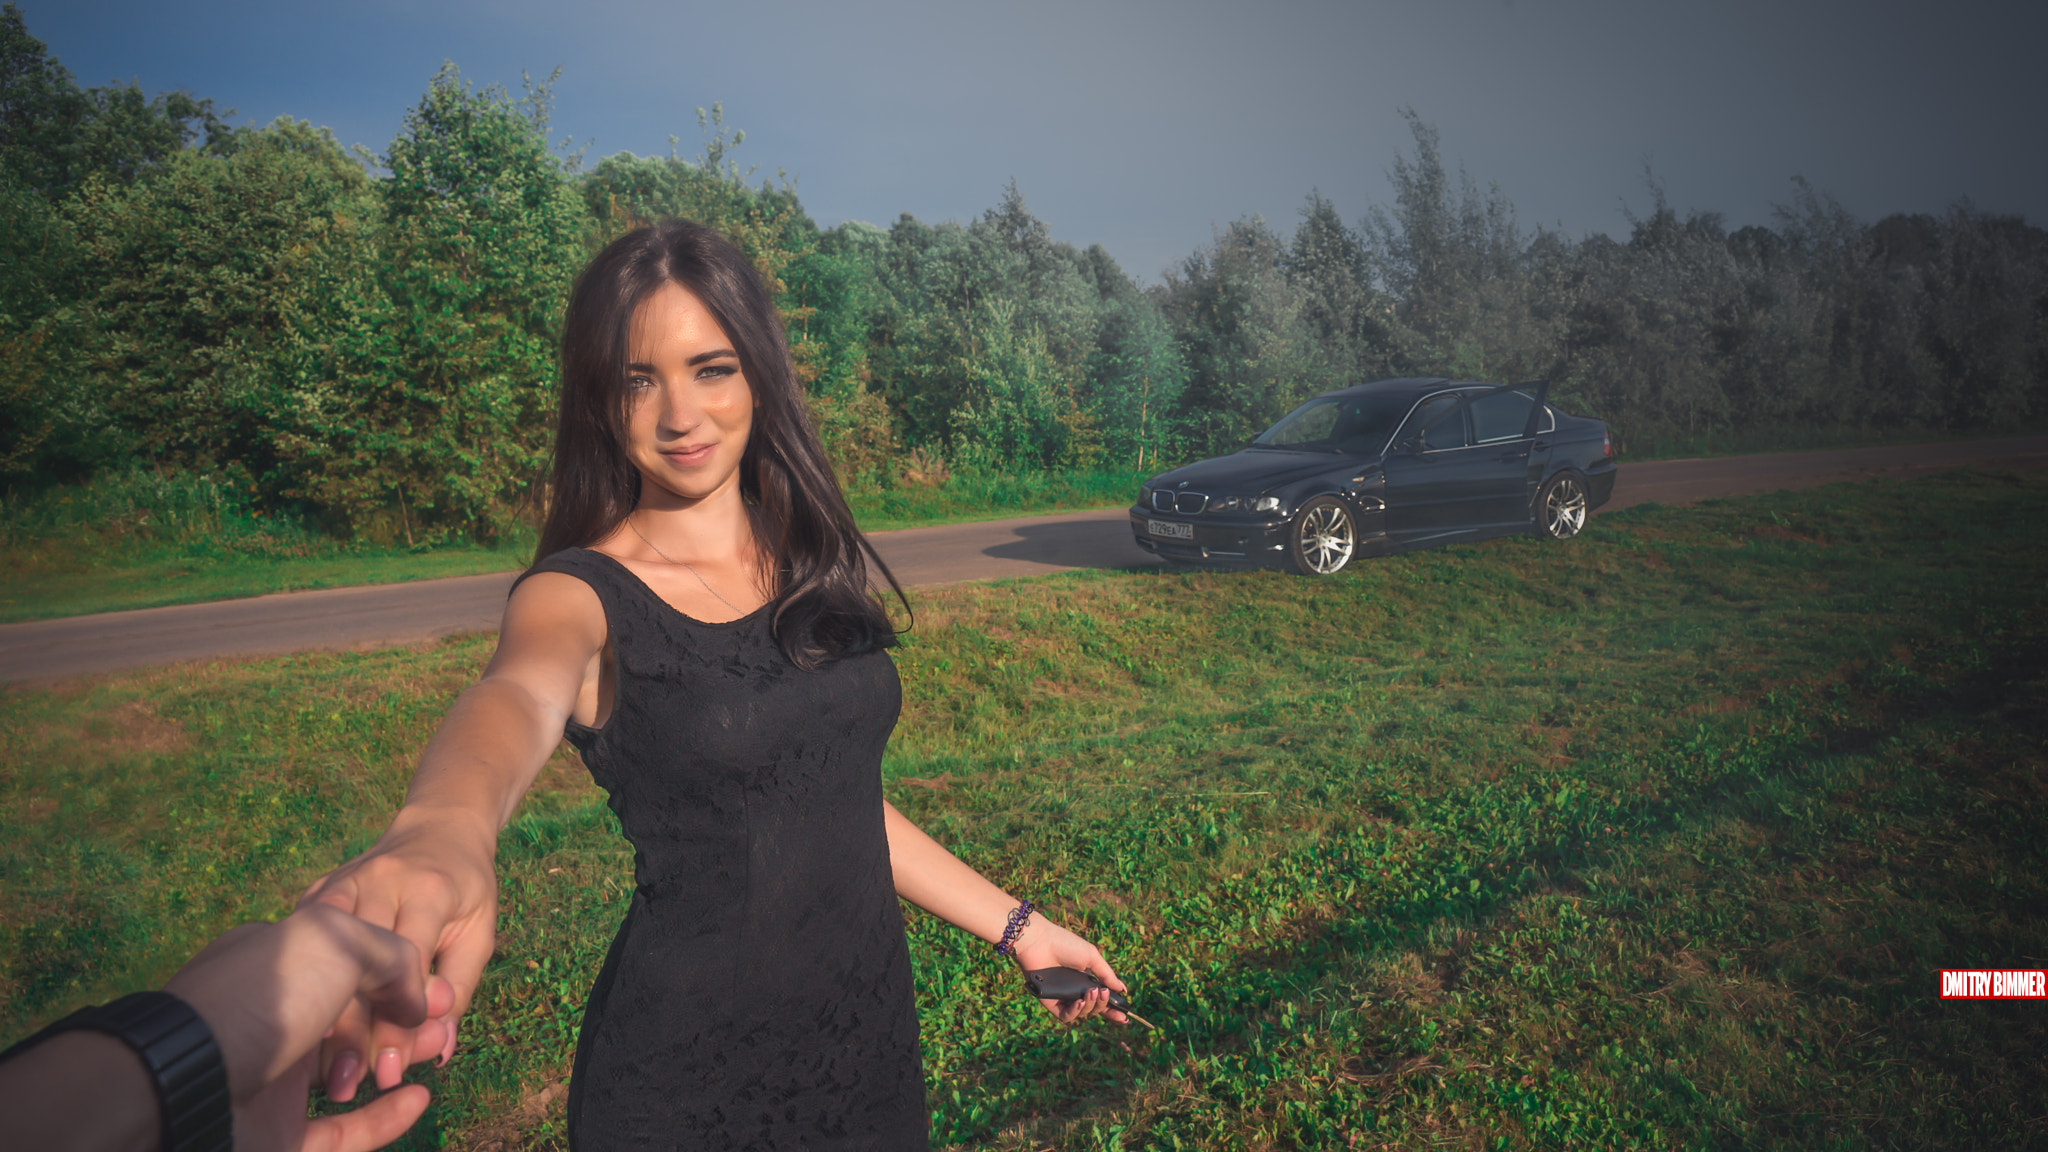 Sony a99 II sample photo. Bmw e46 and sexy girl photography